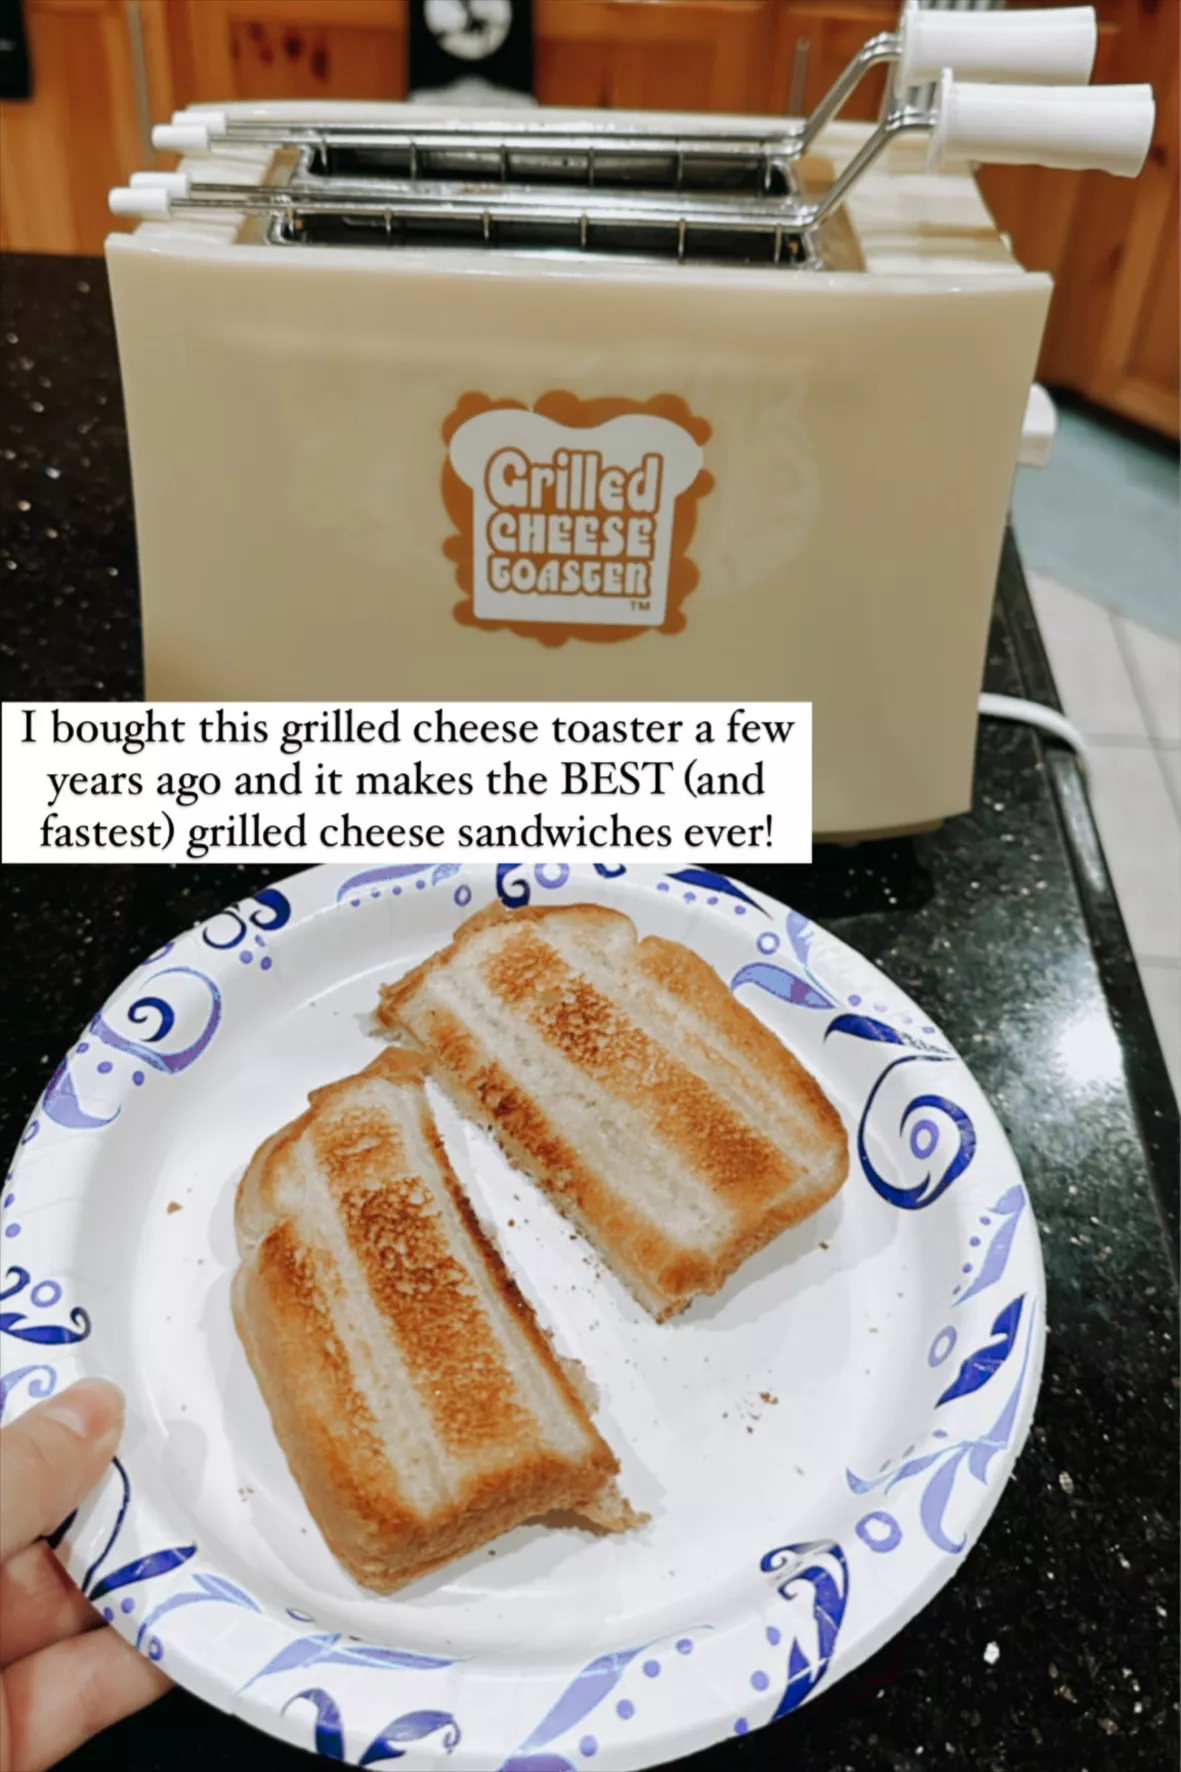 Nostalgia Grilled Cheese Toaster: The Best Way to Make Grilled